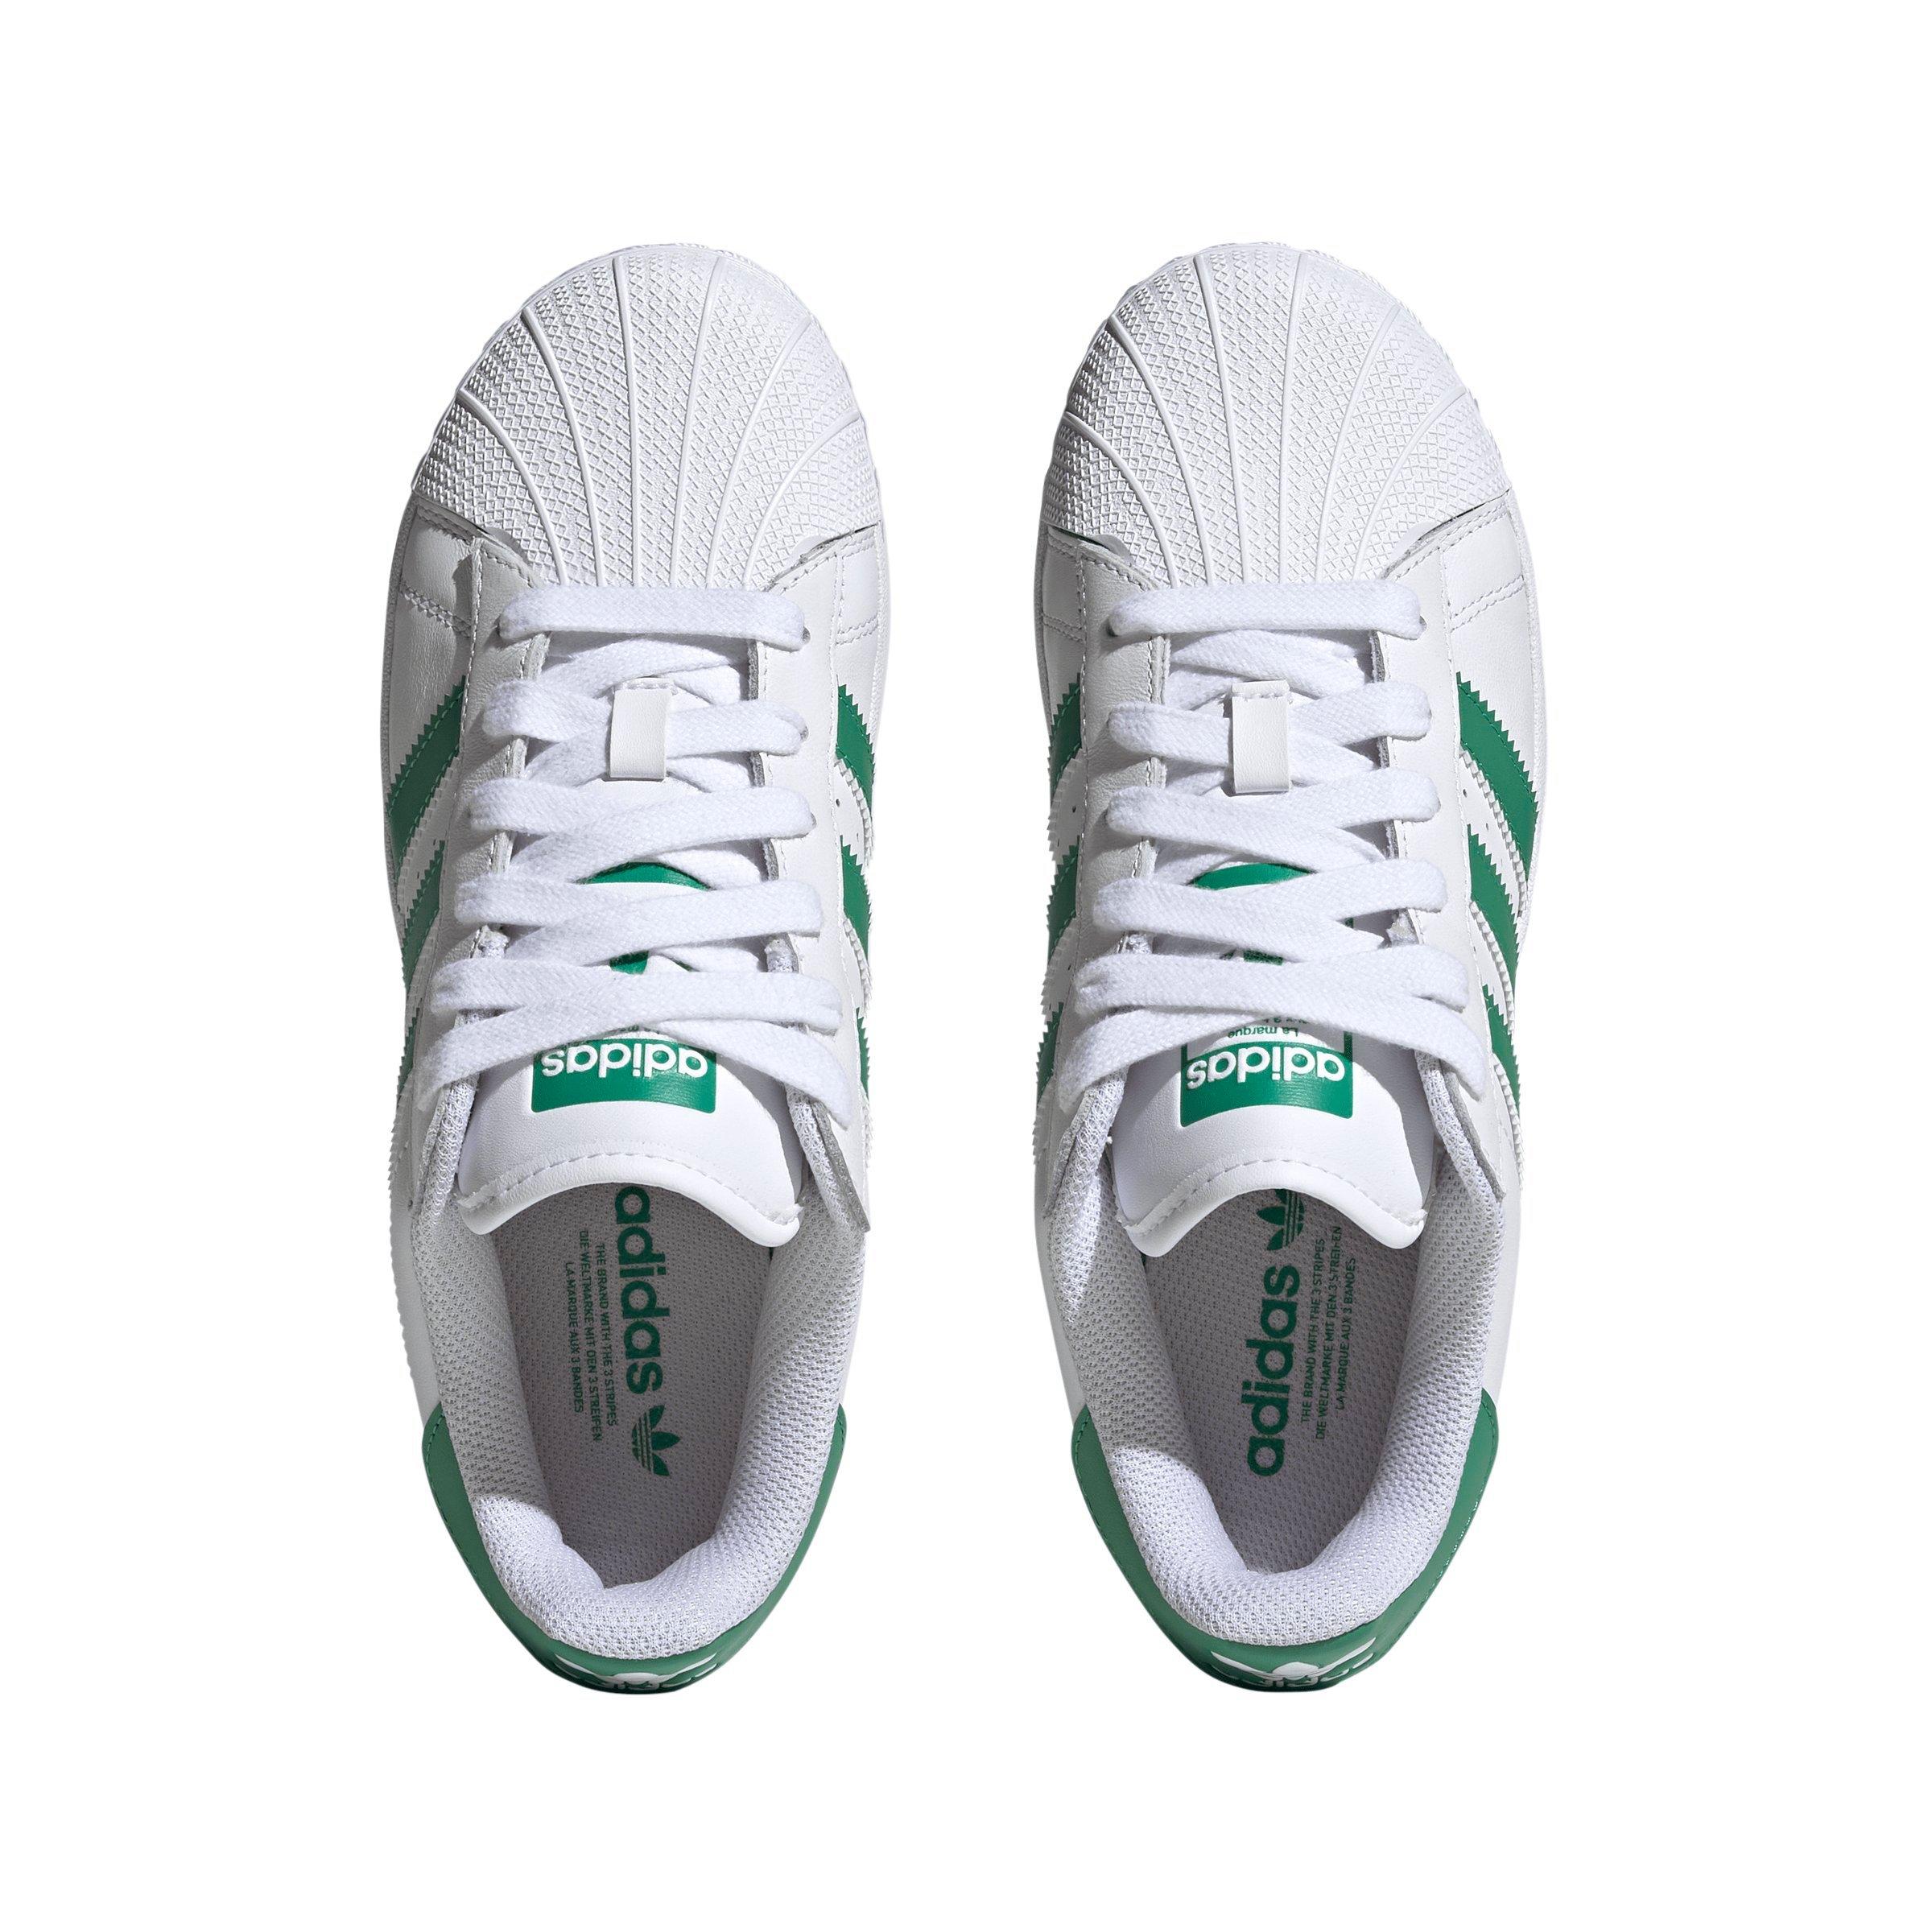 adidas Superstar XLG trainers in future white/green - ShopStyle